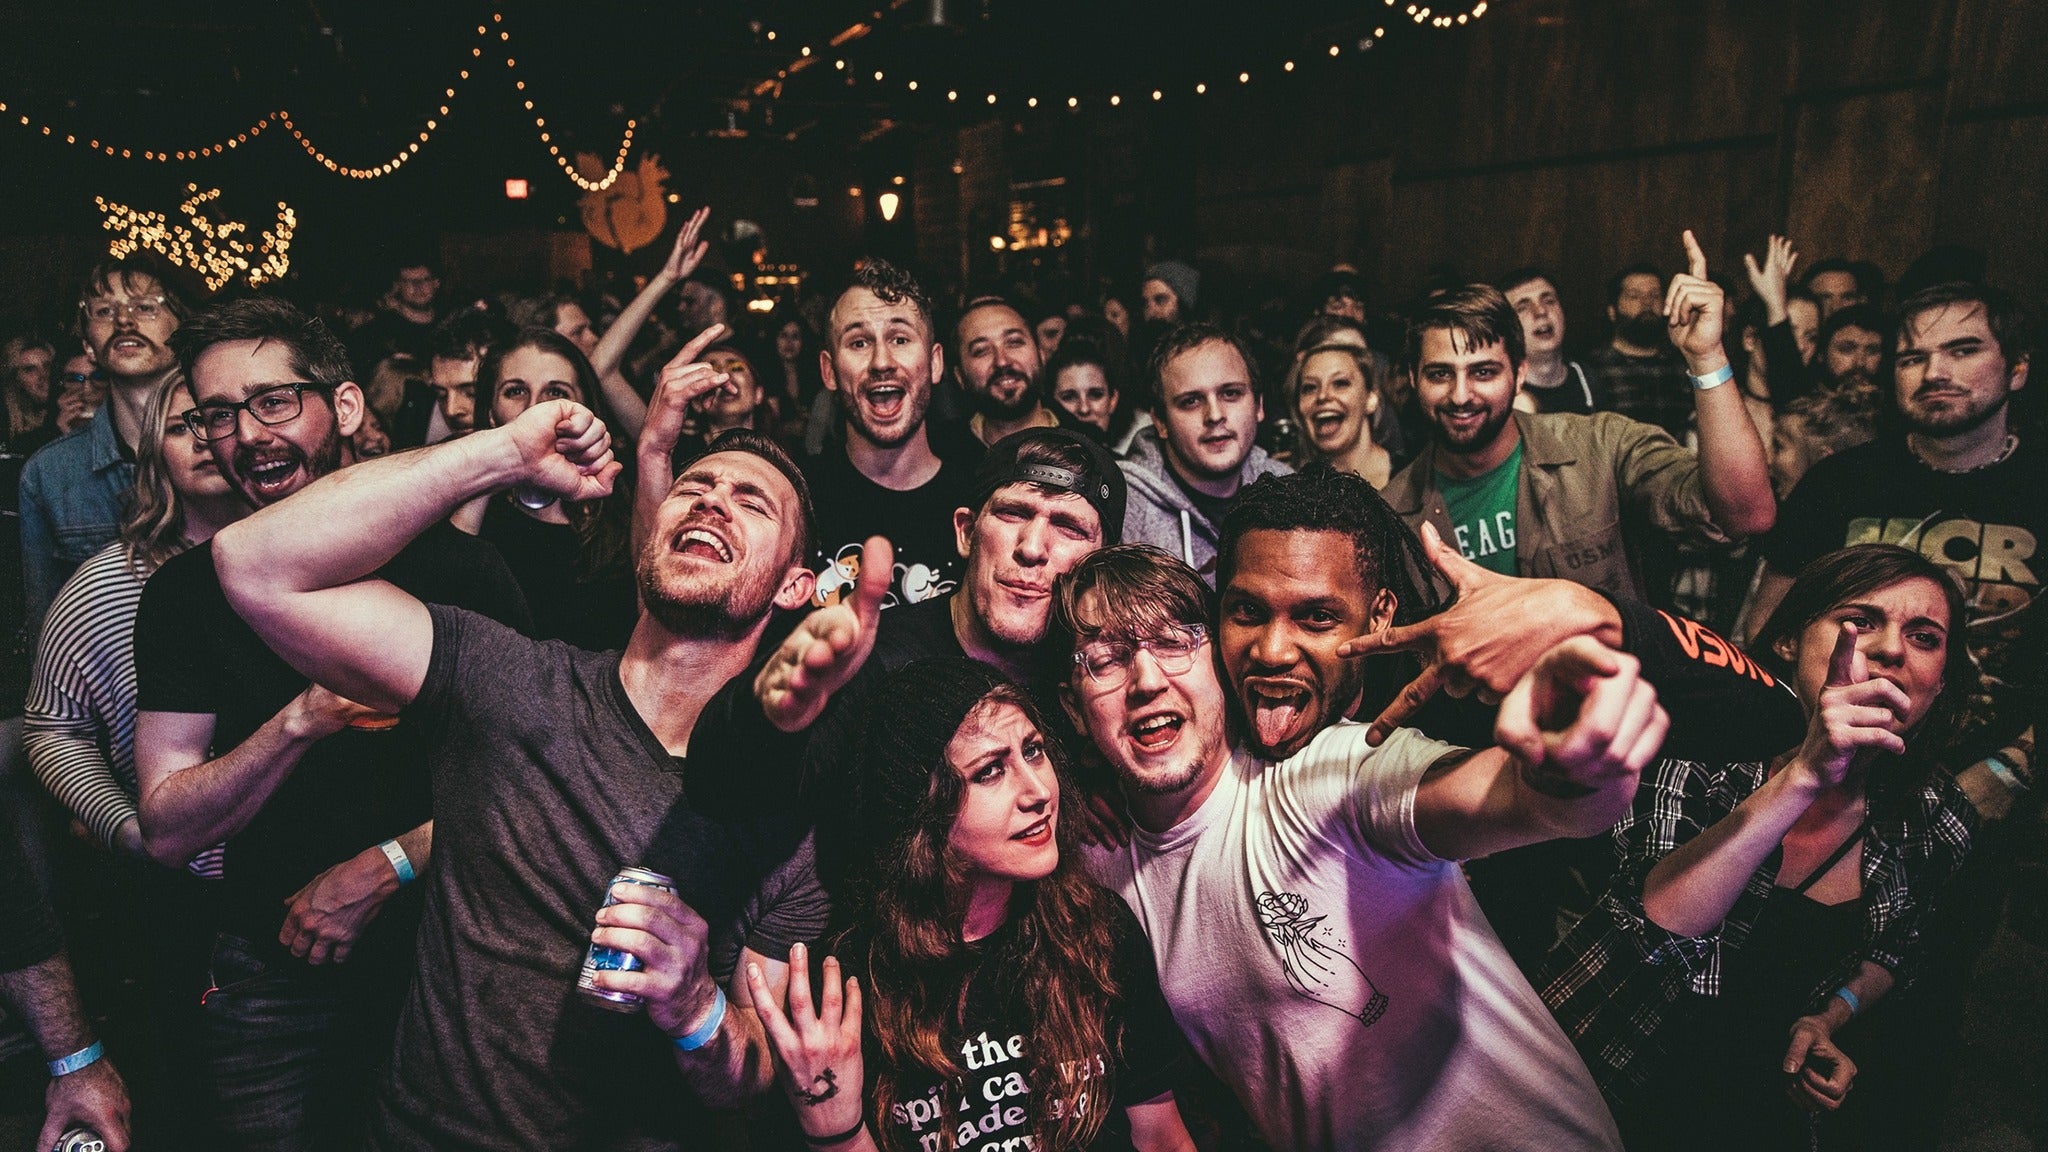 THE EMO BAND: Emo + Pop Punk Live Band Karaoke Party (21+) in Pittsburgh promo photo for Live Nation presale offer code